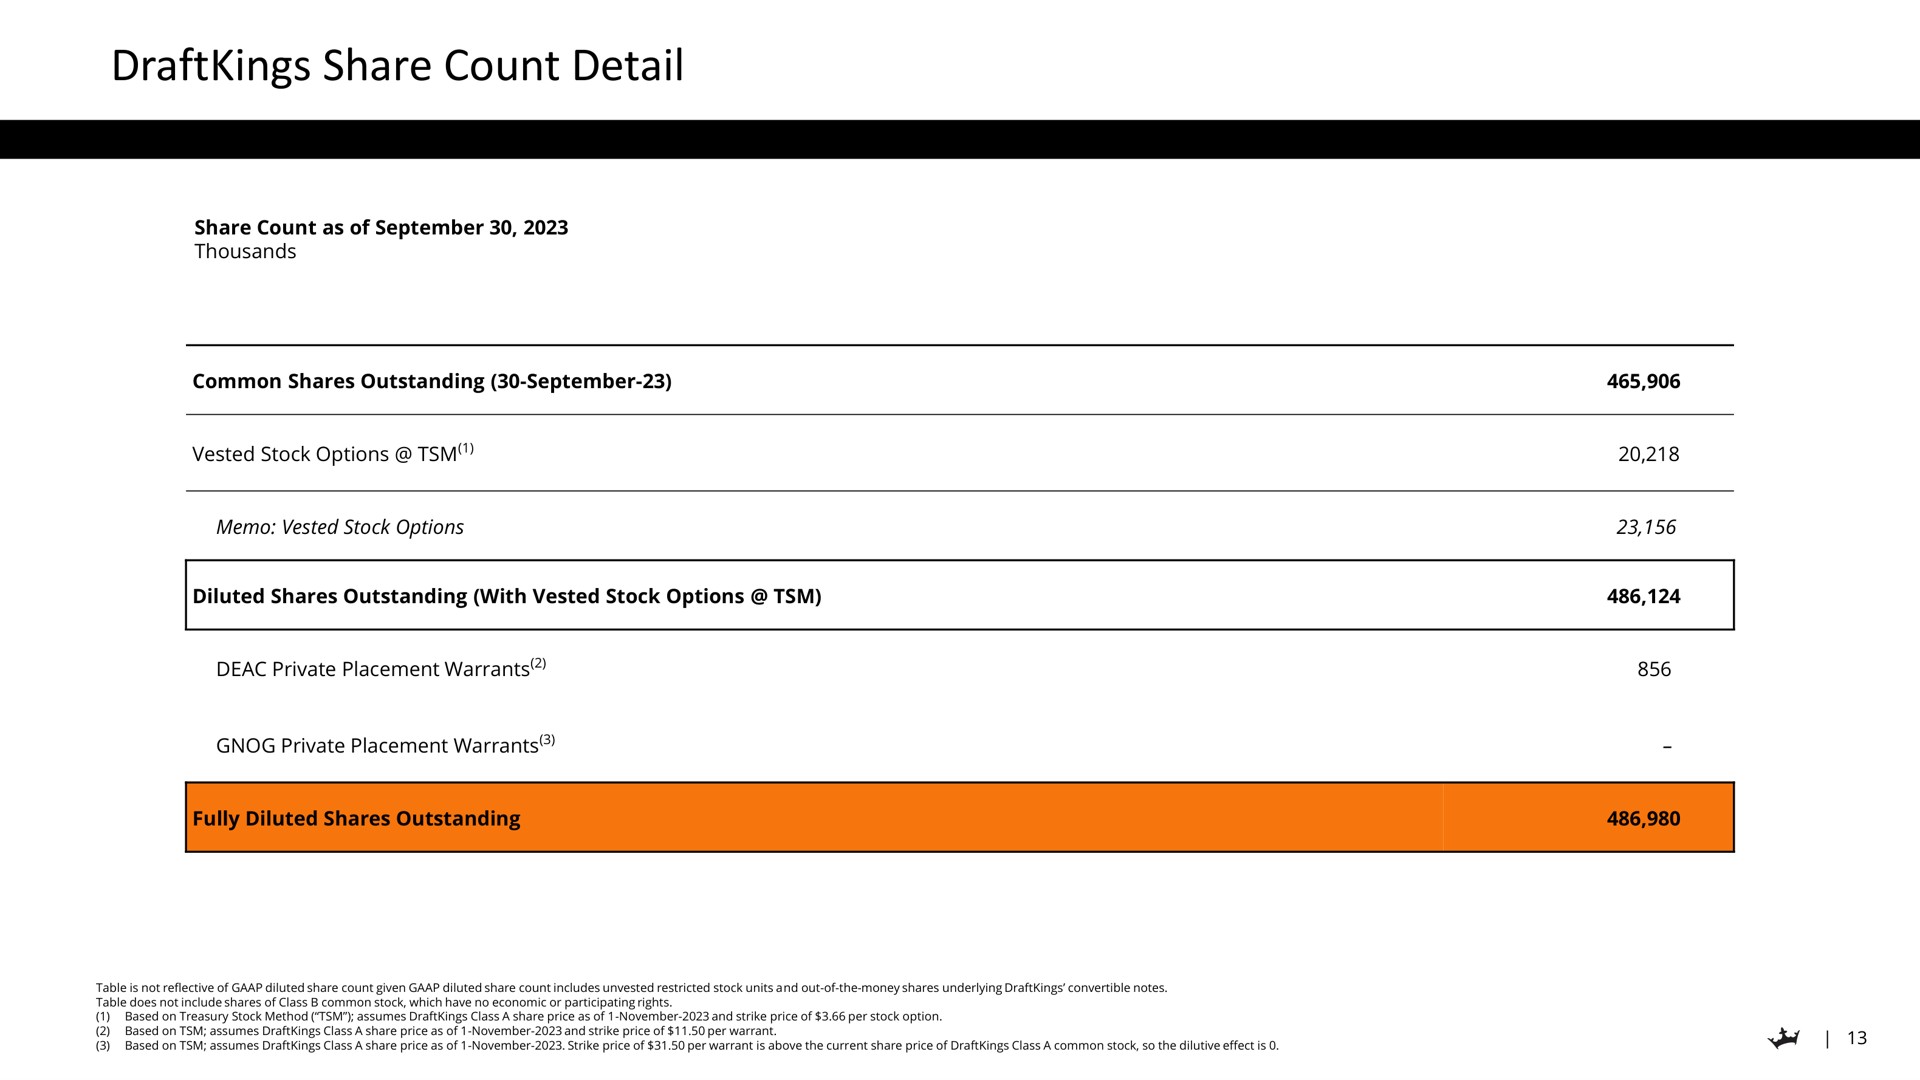 share count detail | DraftKings